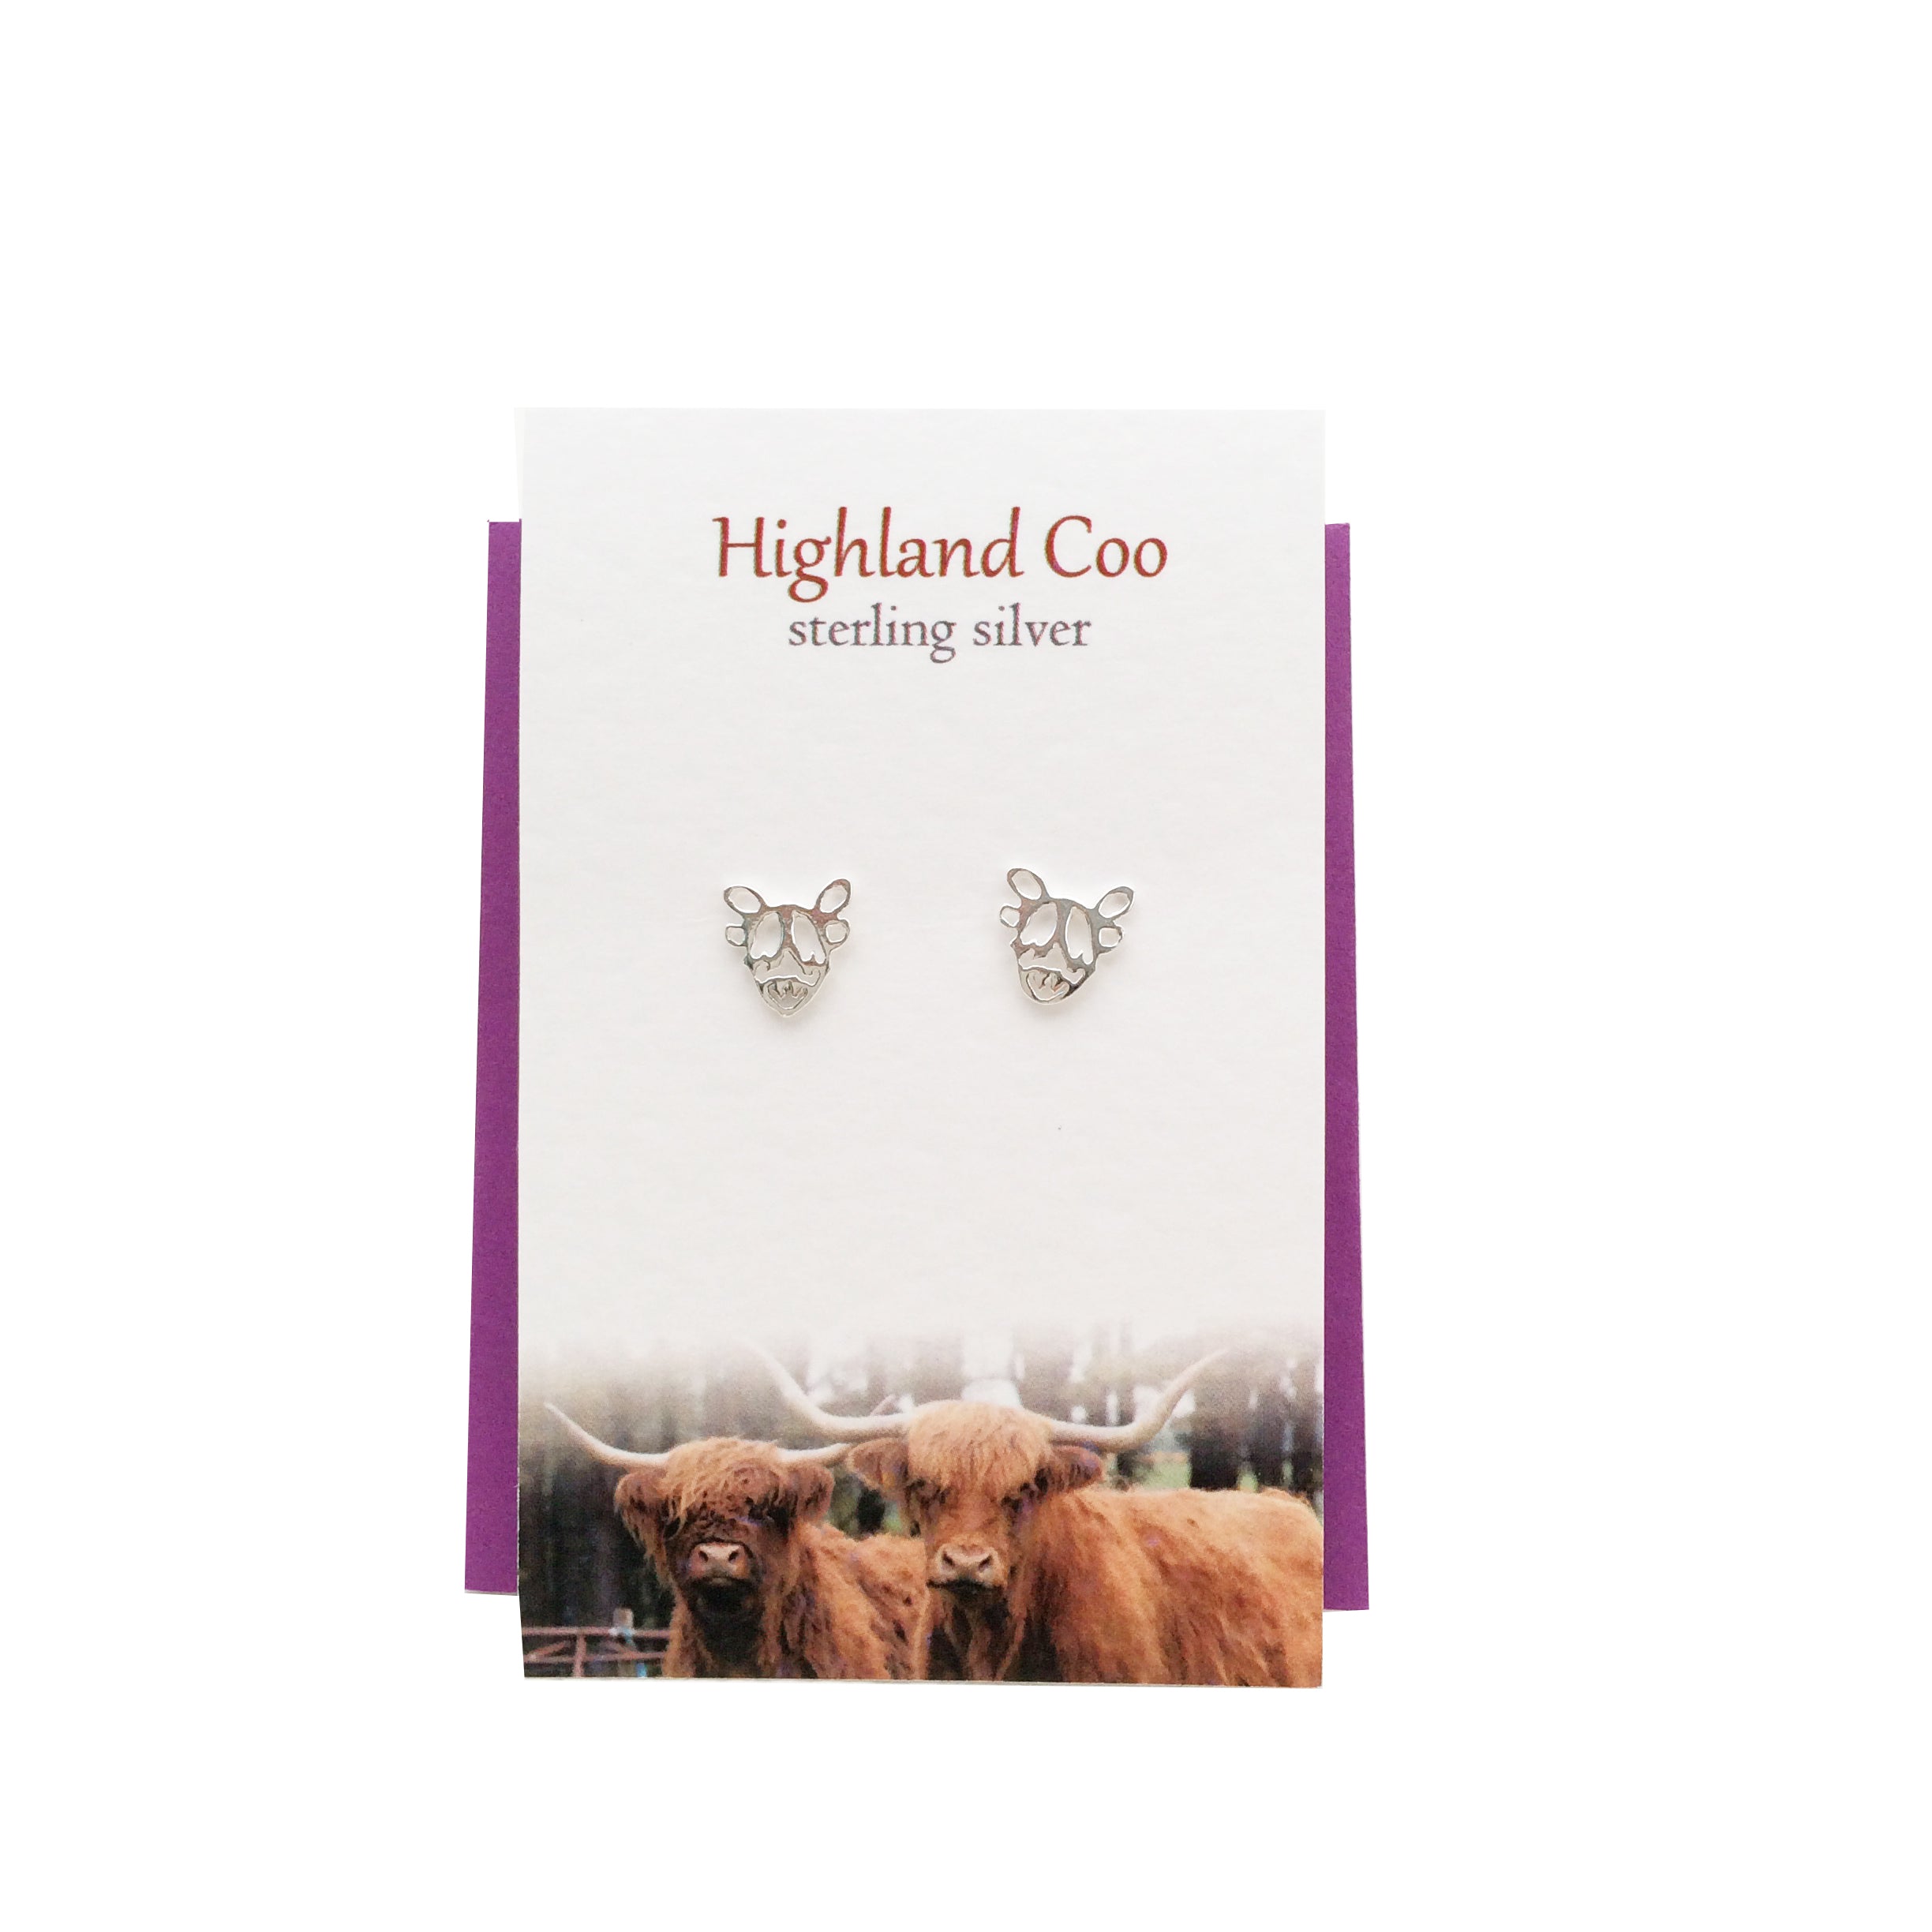 Highland Coo silver stud earrings| The Silver Studio Scotland